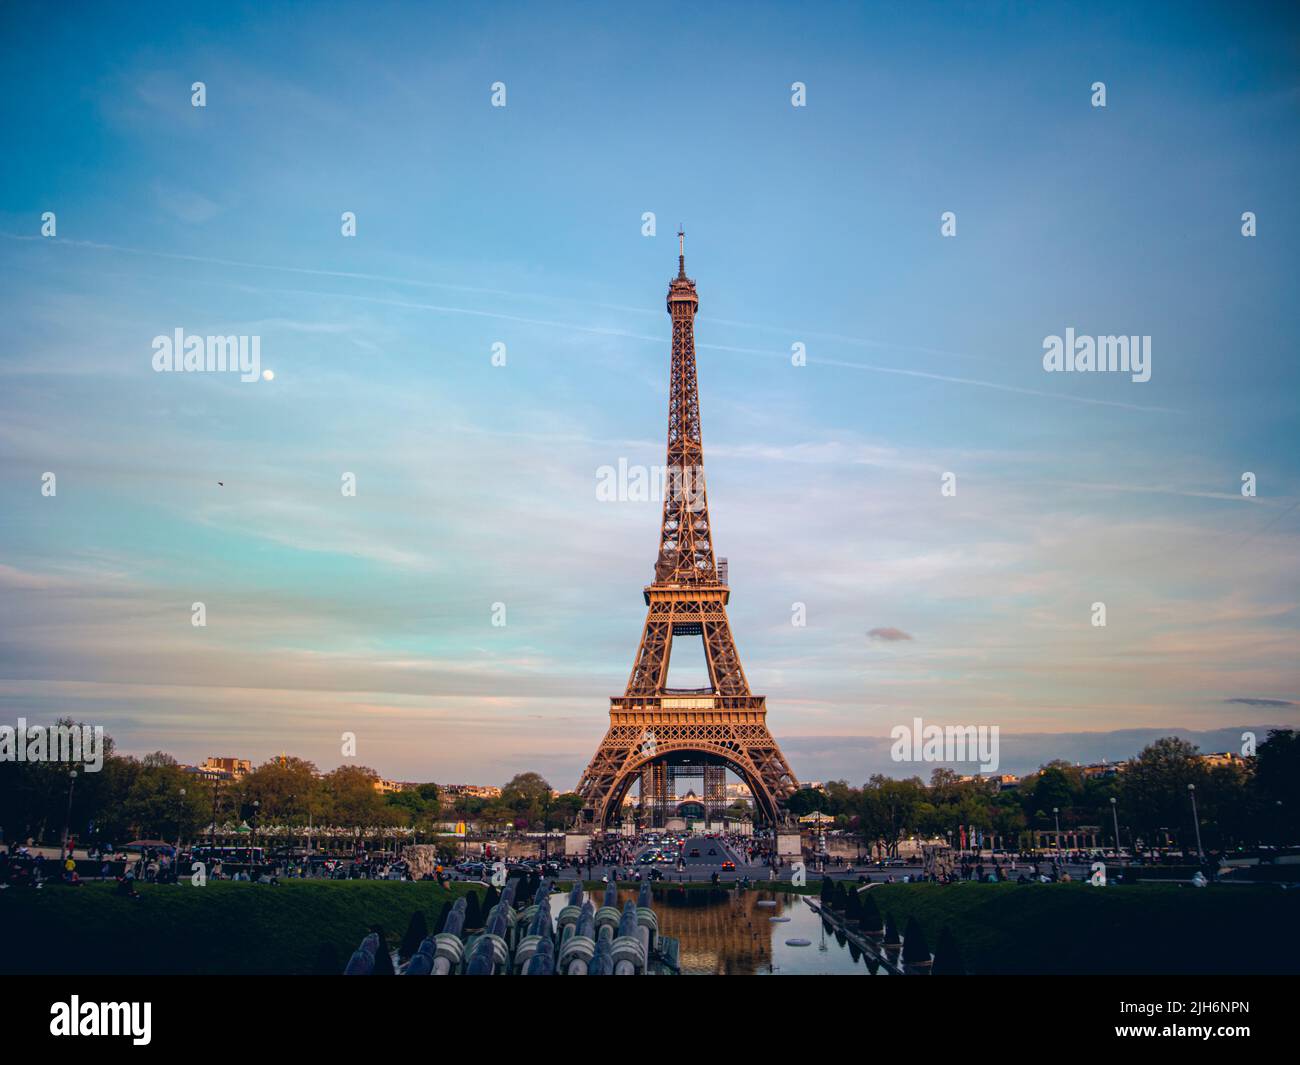 Beautiful view of the Eiffel Tower at night and illuminated. Stock Photo